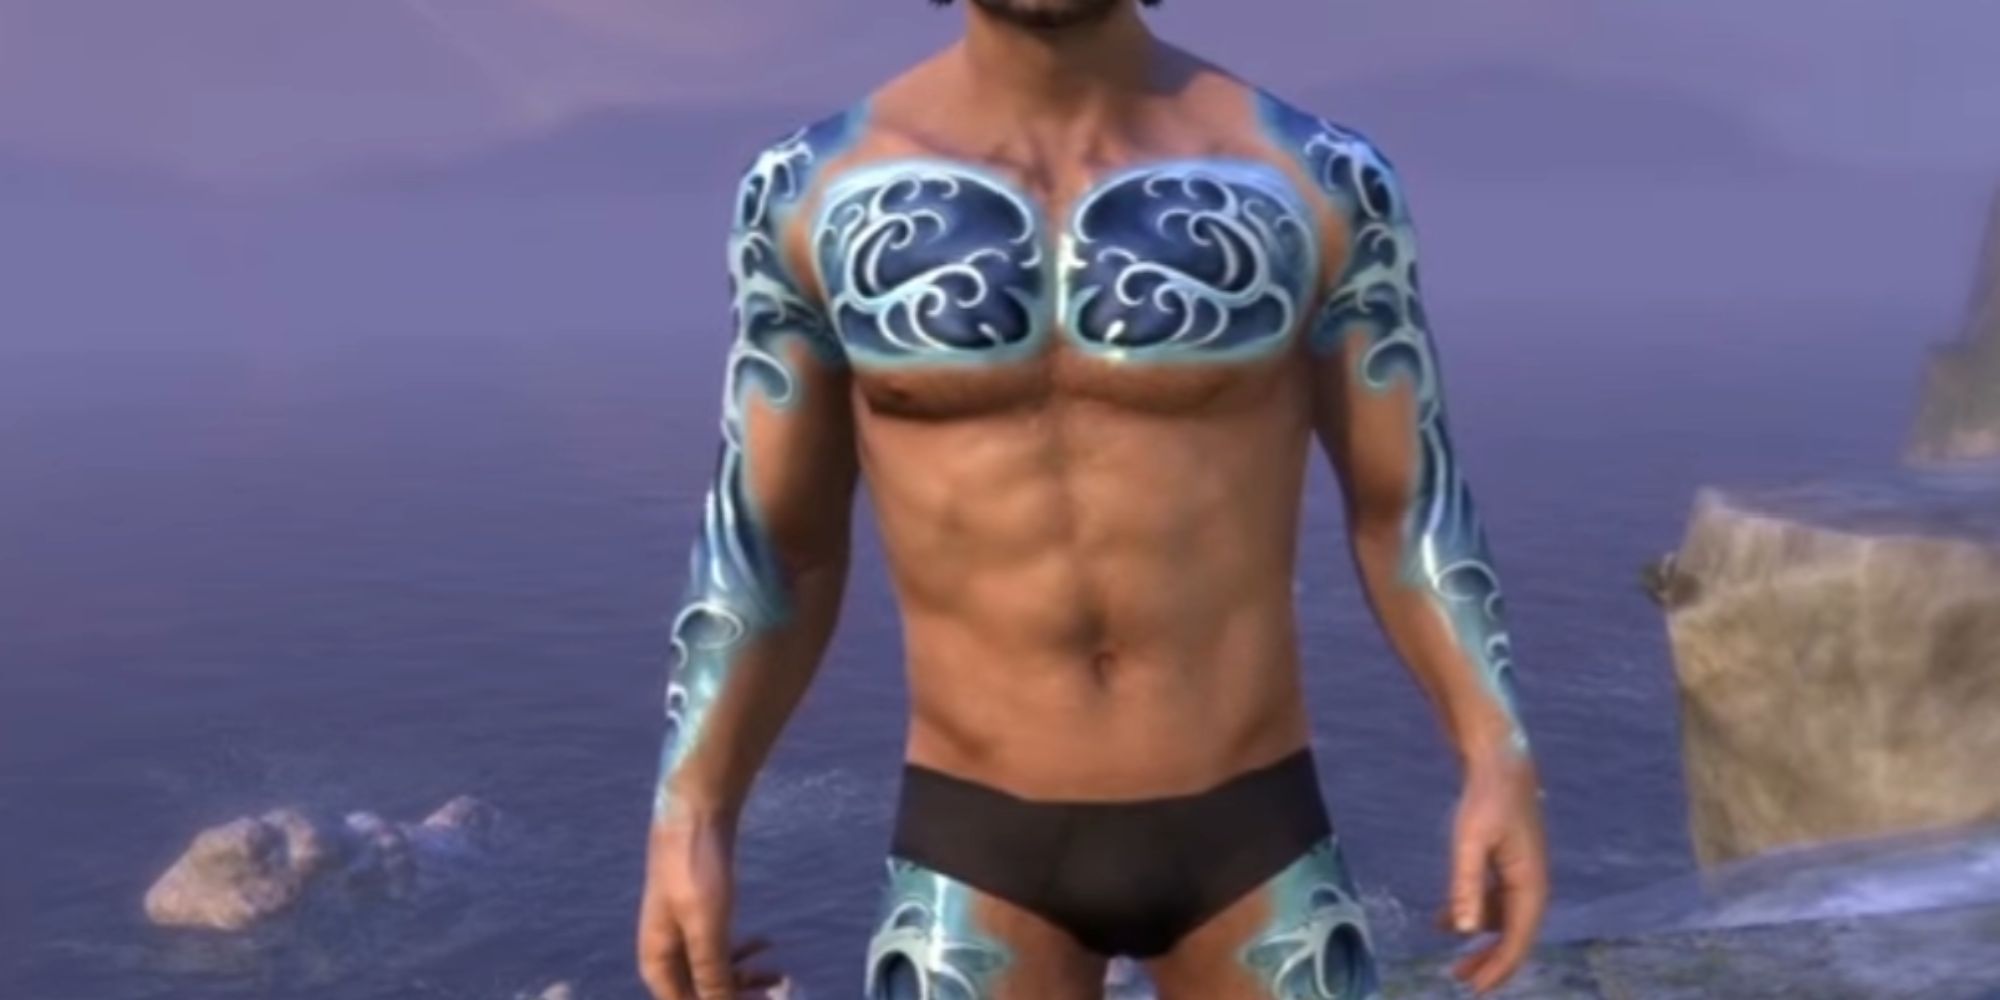 ESO Stormsurge Body Markings On A Character's Chest And Legs